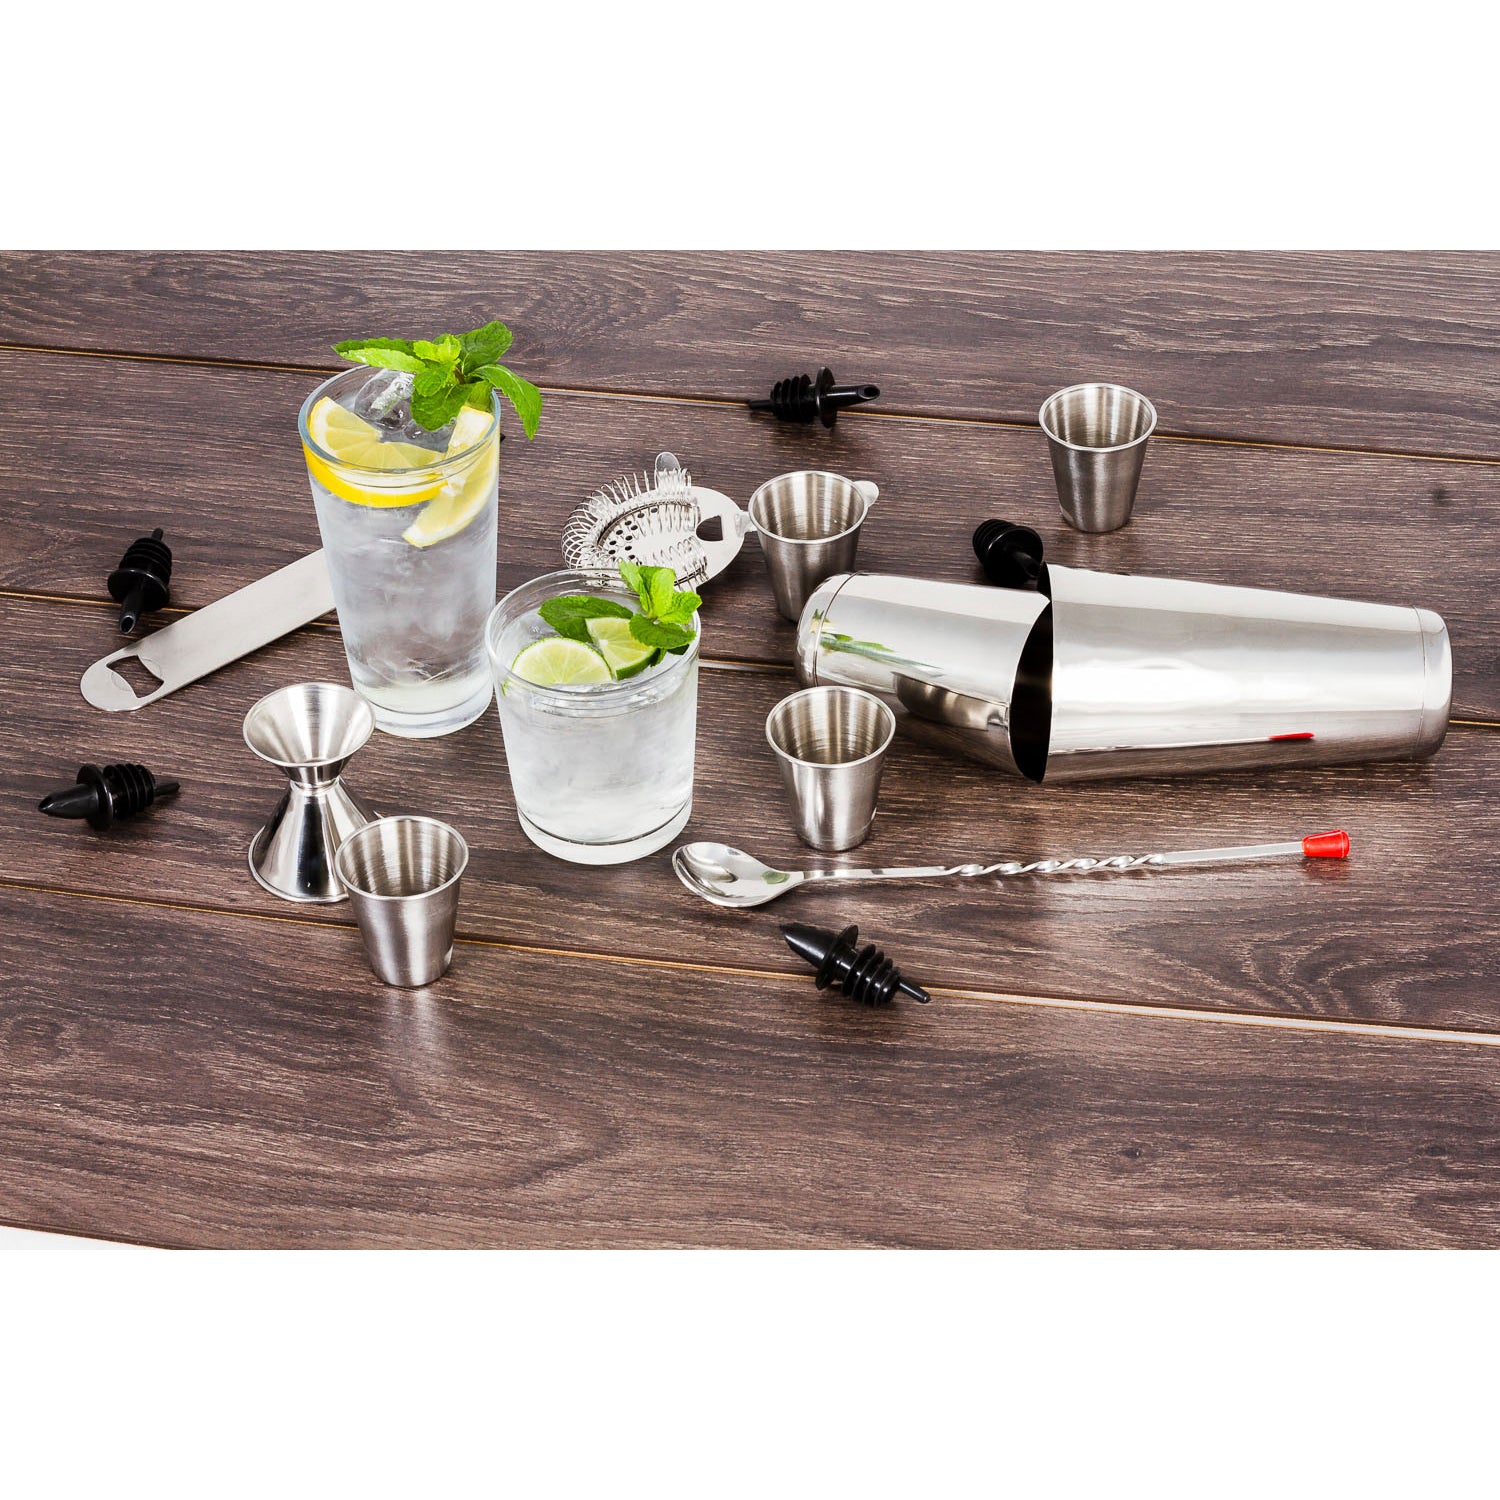 Stainless Steel 16 Pcs. Cocktail Shaker Set - Complete Professional Bar Tool Set